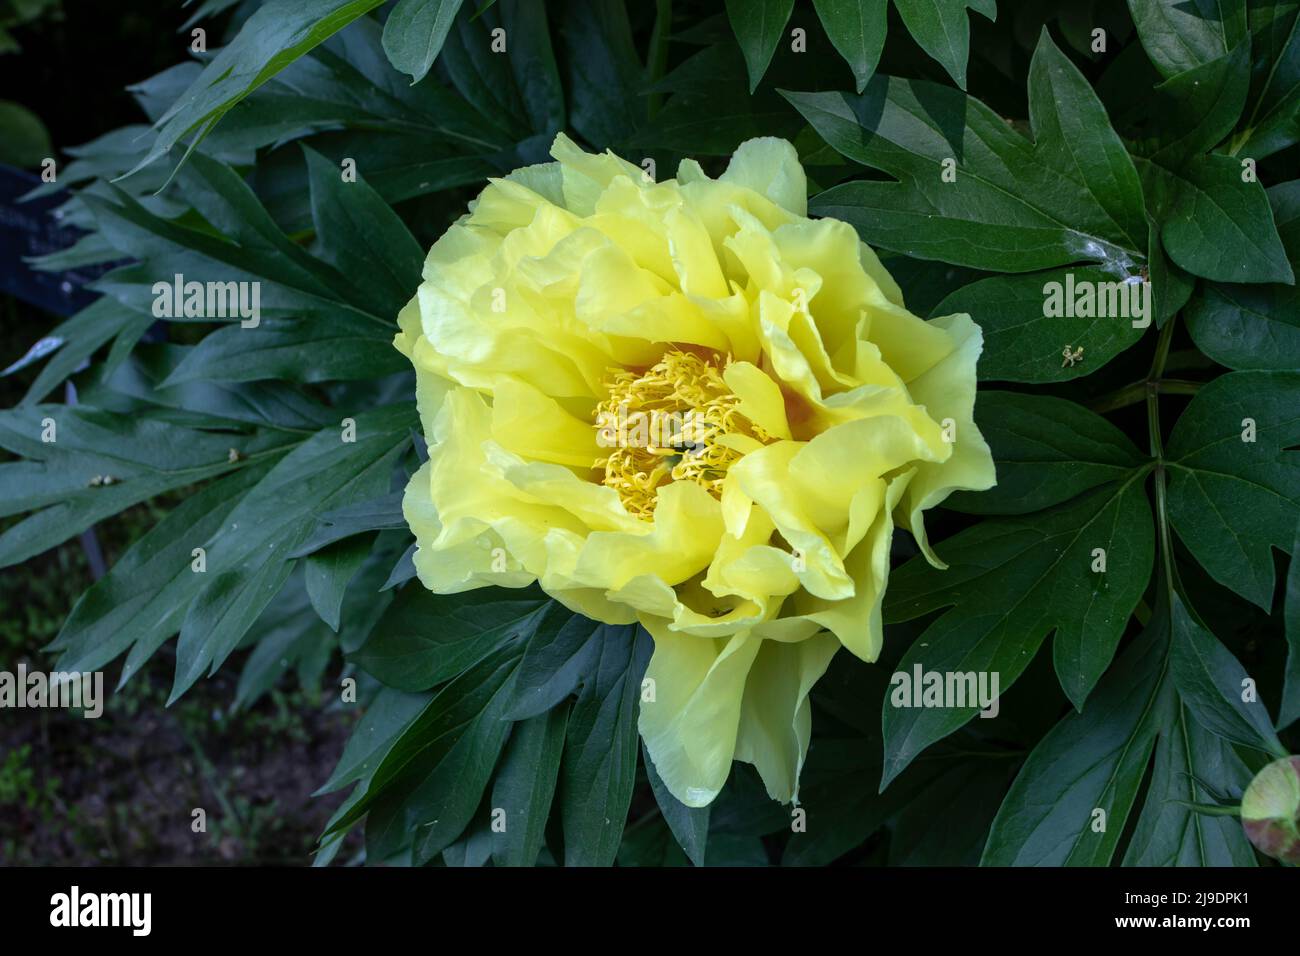 Itoh hybrid of herbaceous and tree peony with bright lemon yellow flower and dark green lush foliage Stock Photo